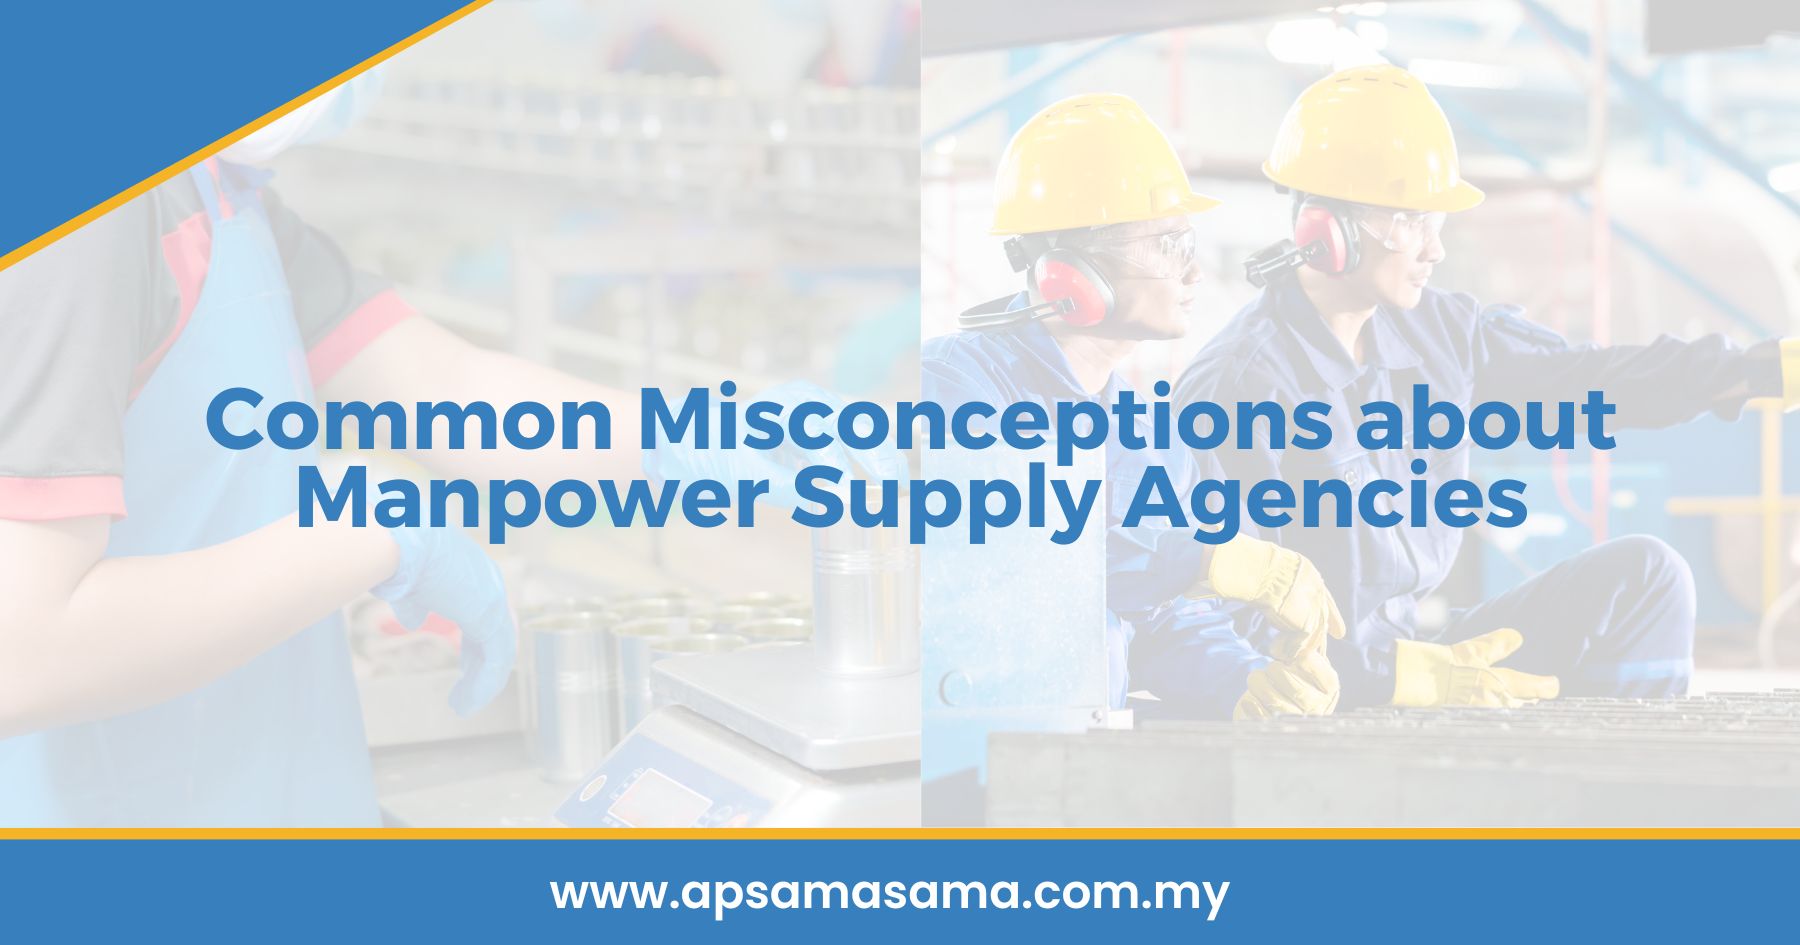 Common Misconceptions about Manpower Supply Agencies